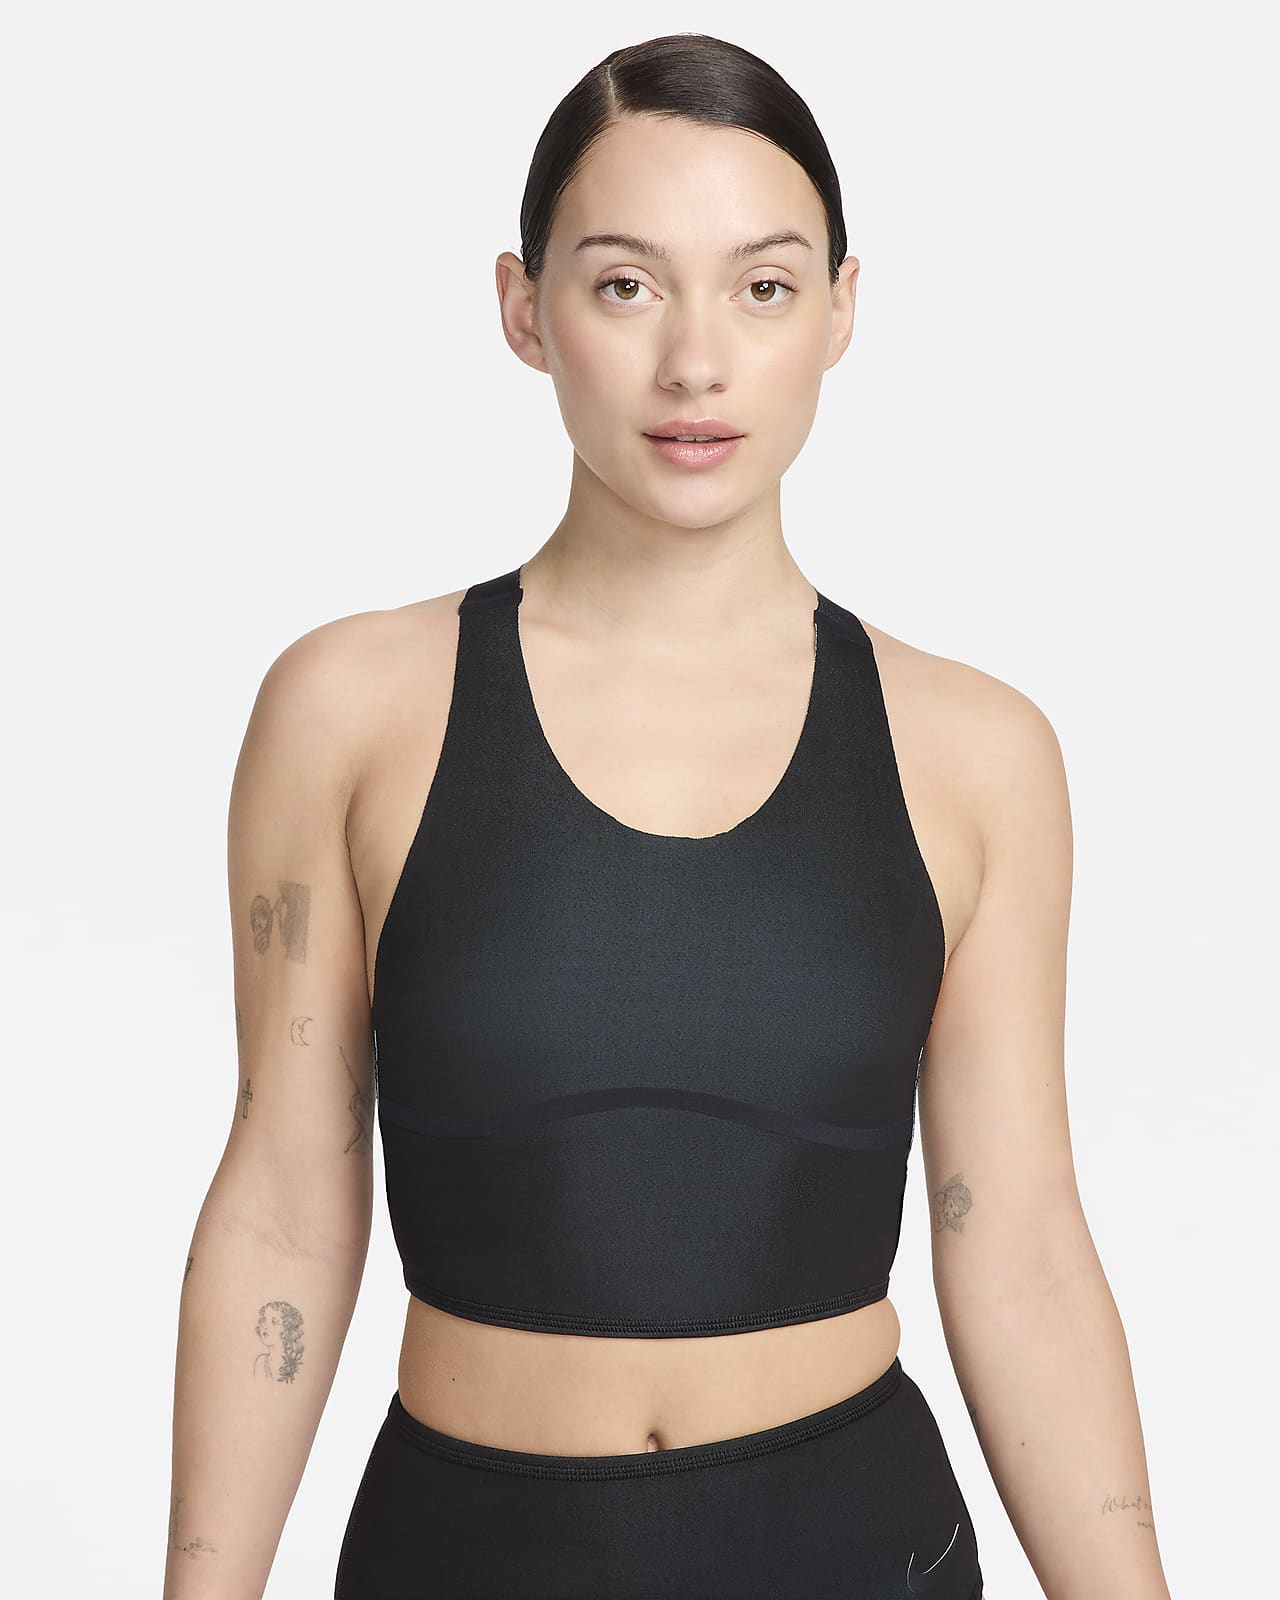 NIKE HAS A SPORTS BRA/TOP THAT CAN BE WORN TO SWIM AND ITS